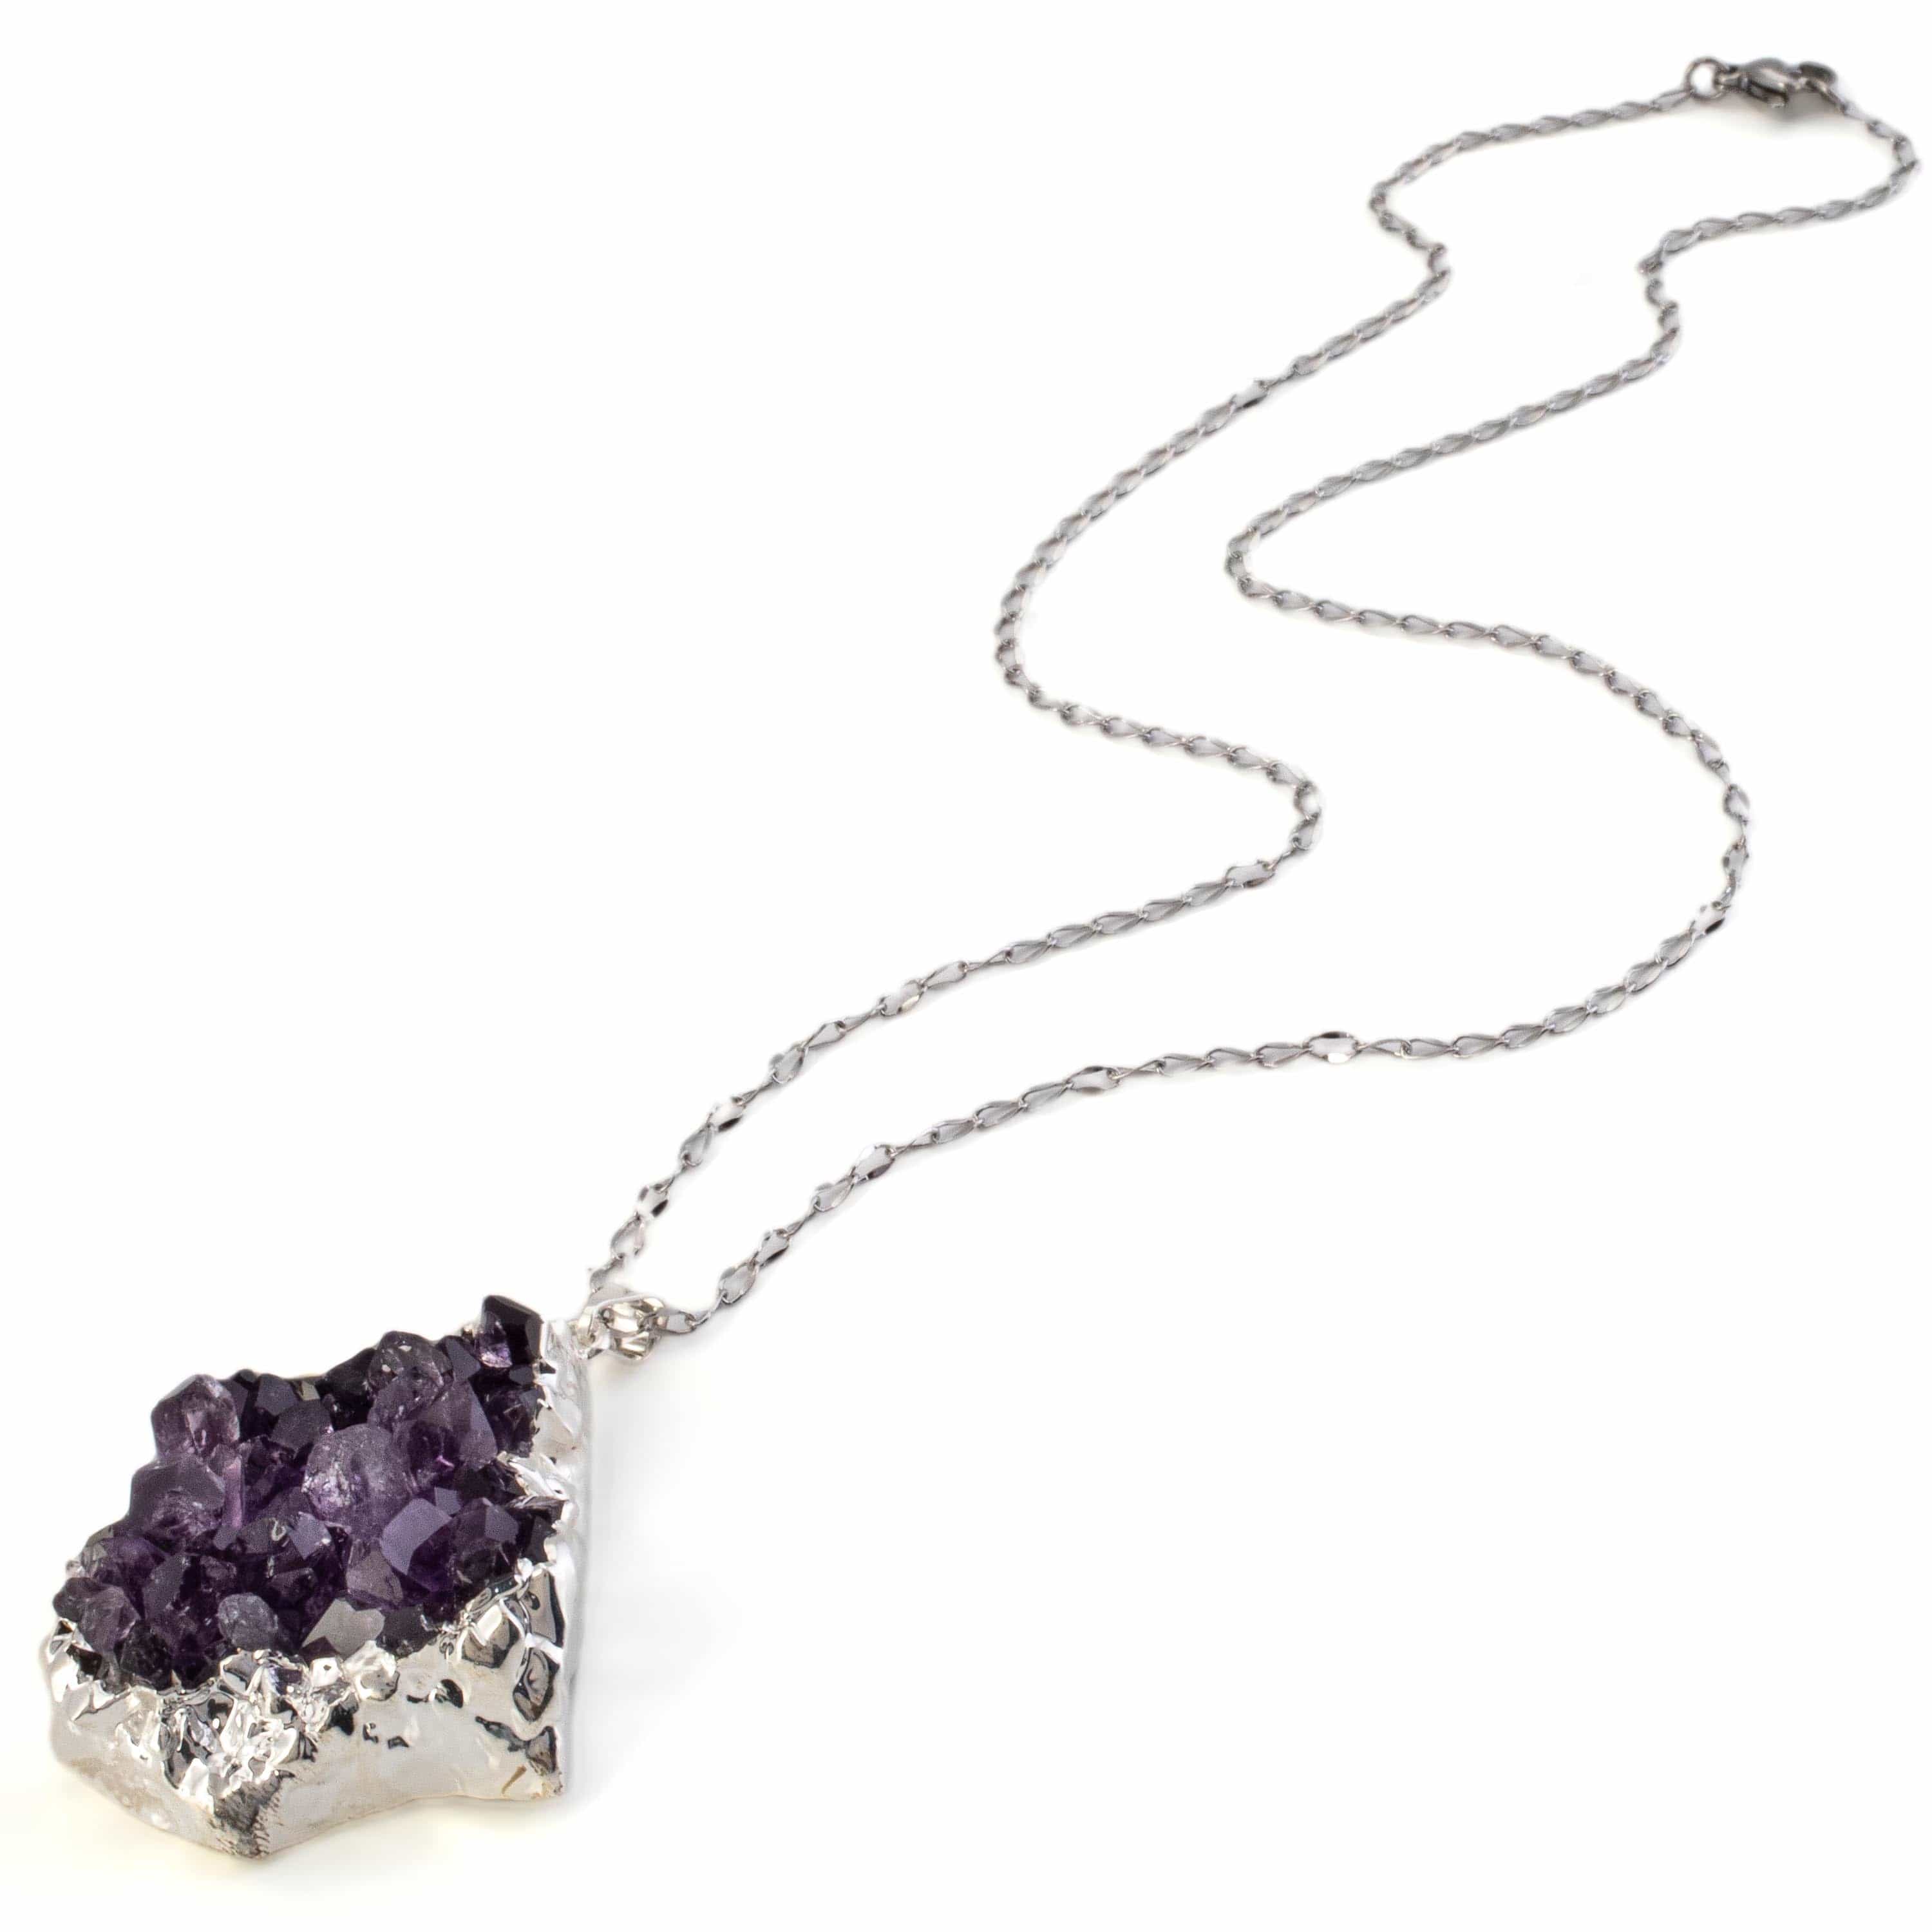 Kalifano Crystal Jewelry Druzy Amethyst Pendant with Silver Plating CJNS80-DYAM